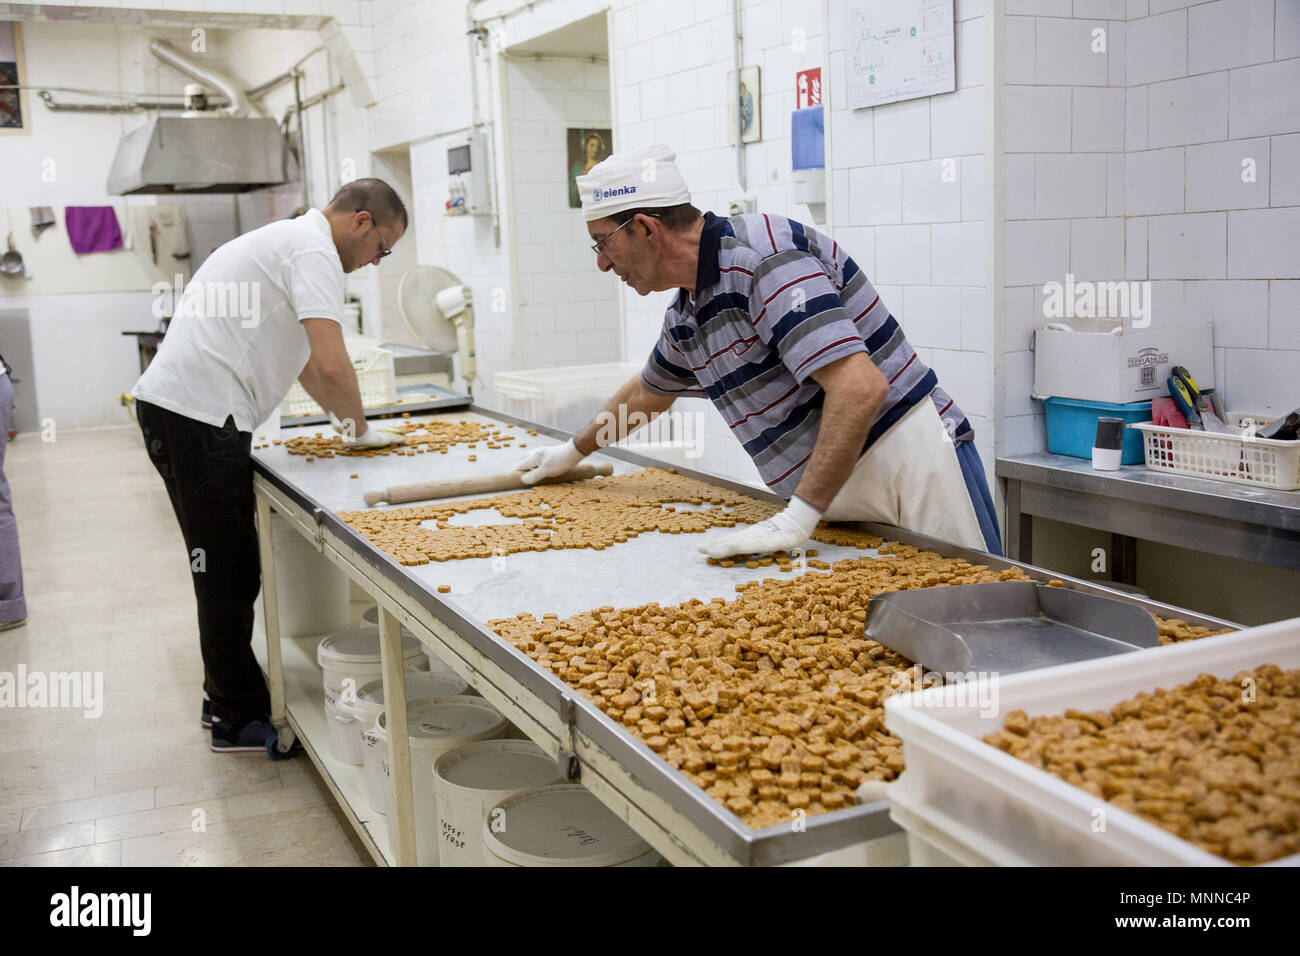 Palermo, Sicily, April 24, 2018: Employees are working in a traditional Sicilian Caramel factory Stock Photo